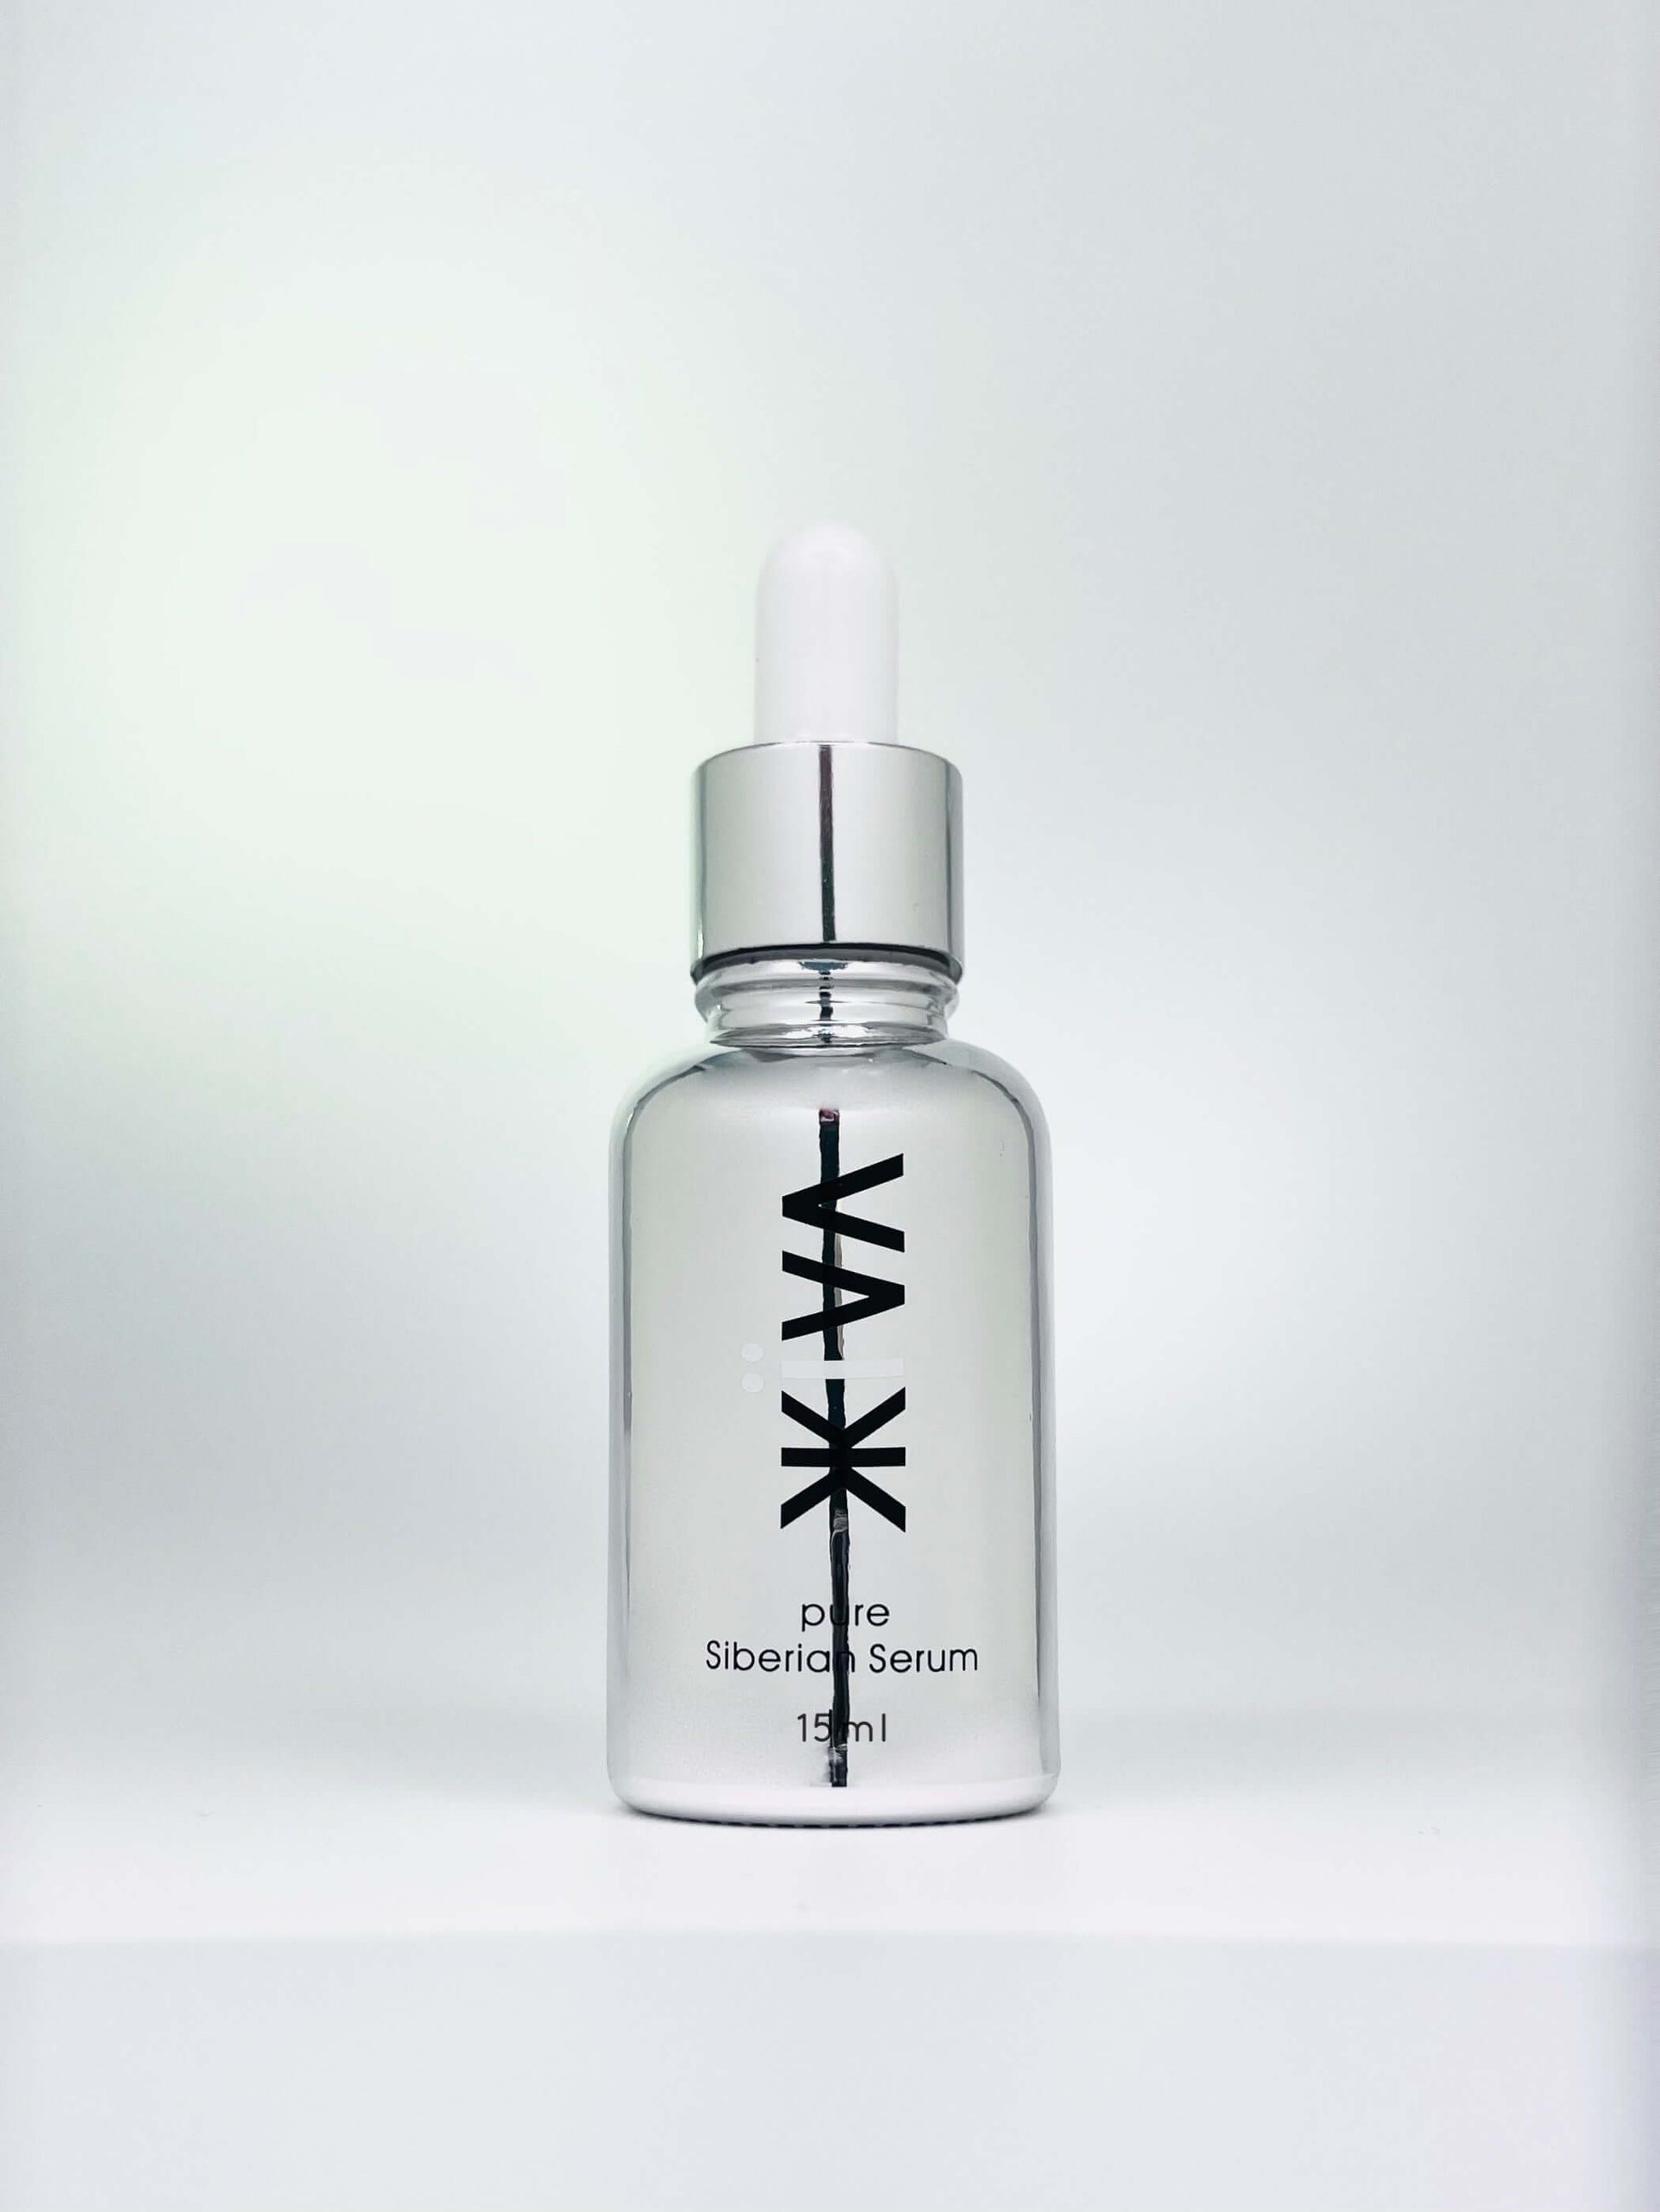 Zhiiva is a pure, organic, “chemistry-free”, sustainable, and 100% natural skincare serum from the heart of Siberian Taiga forest.